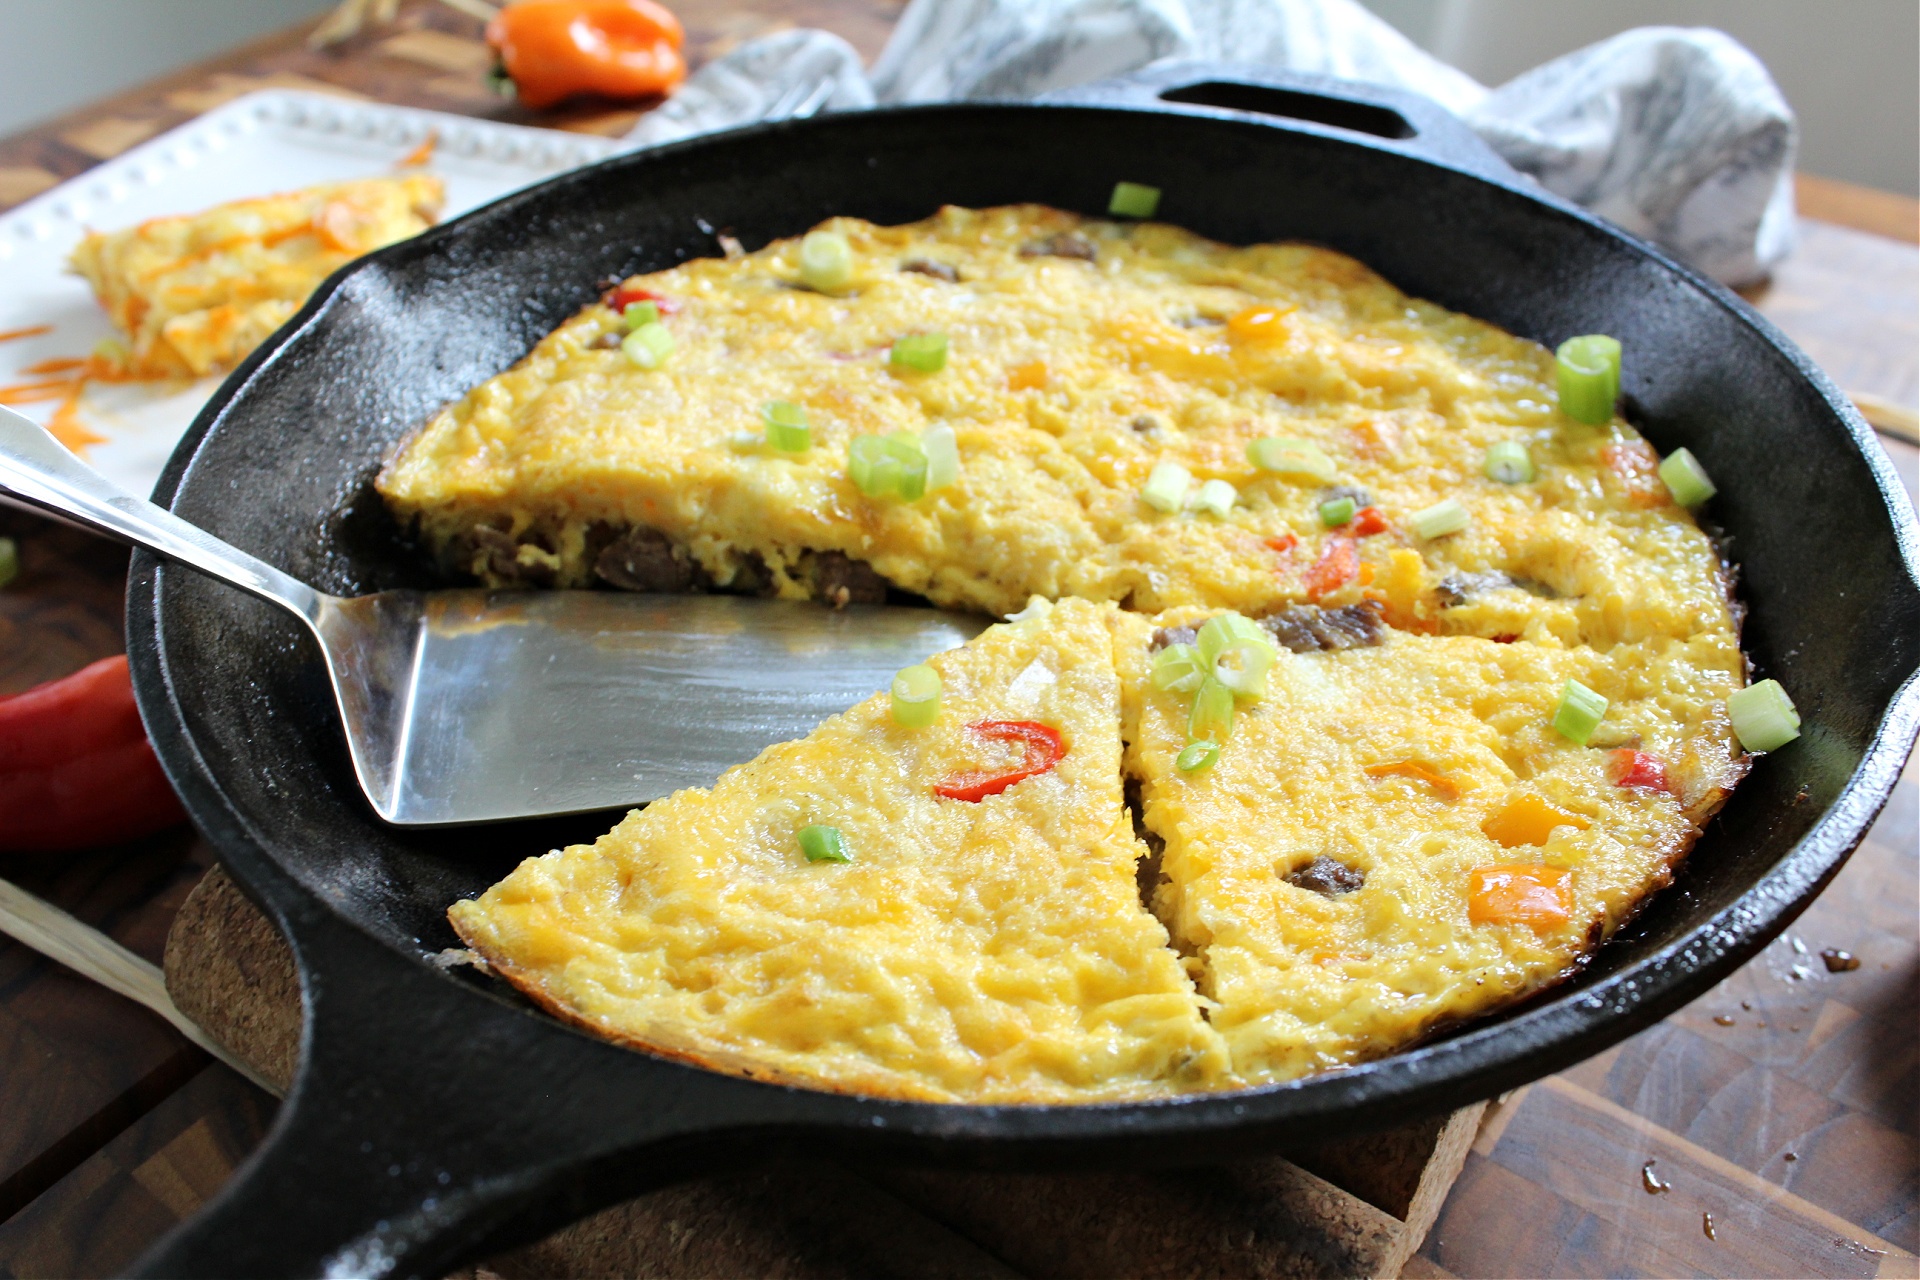 How To Make A Frittata